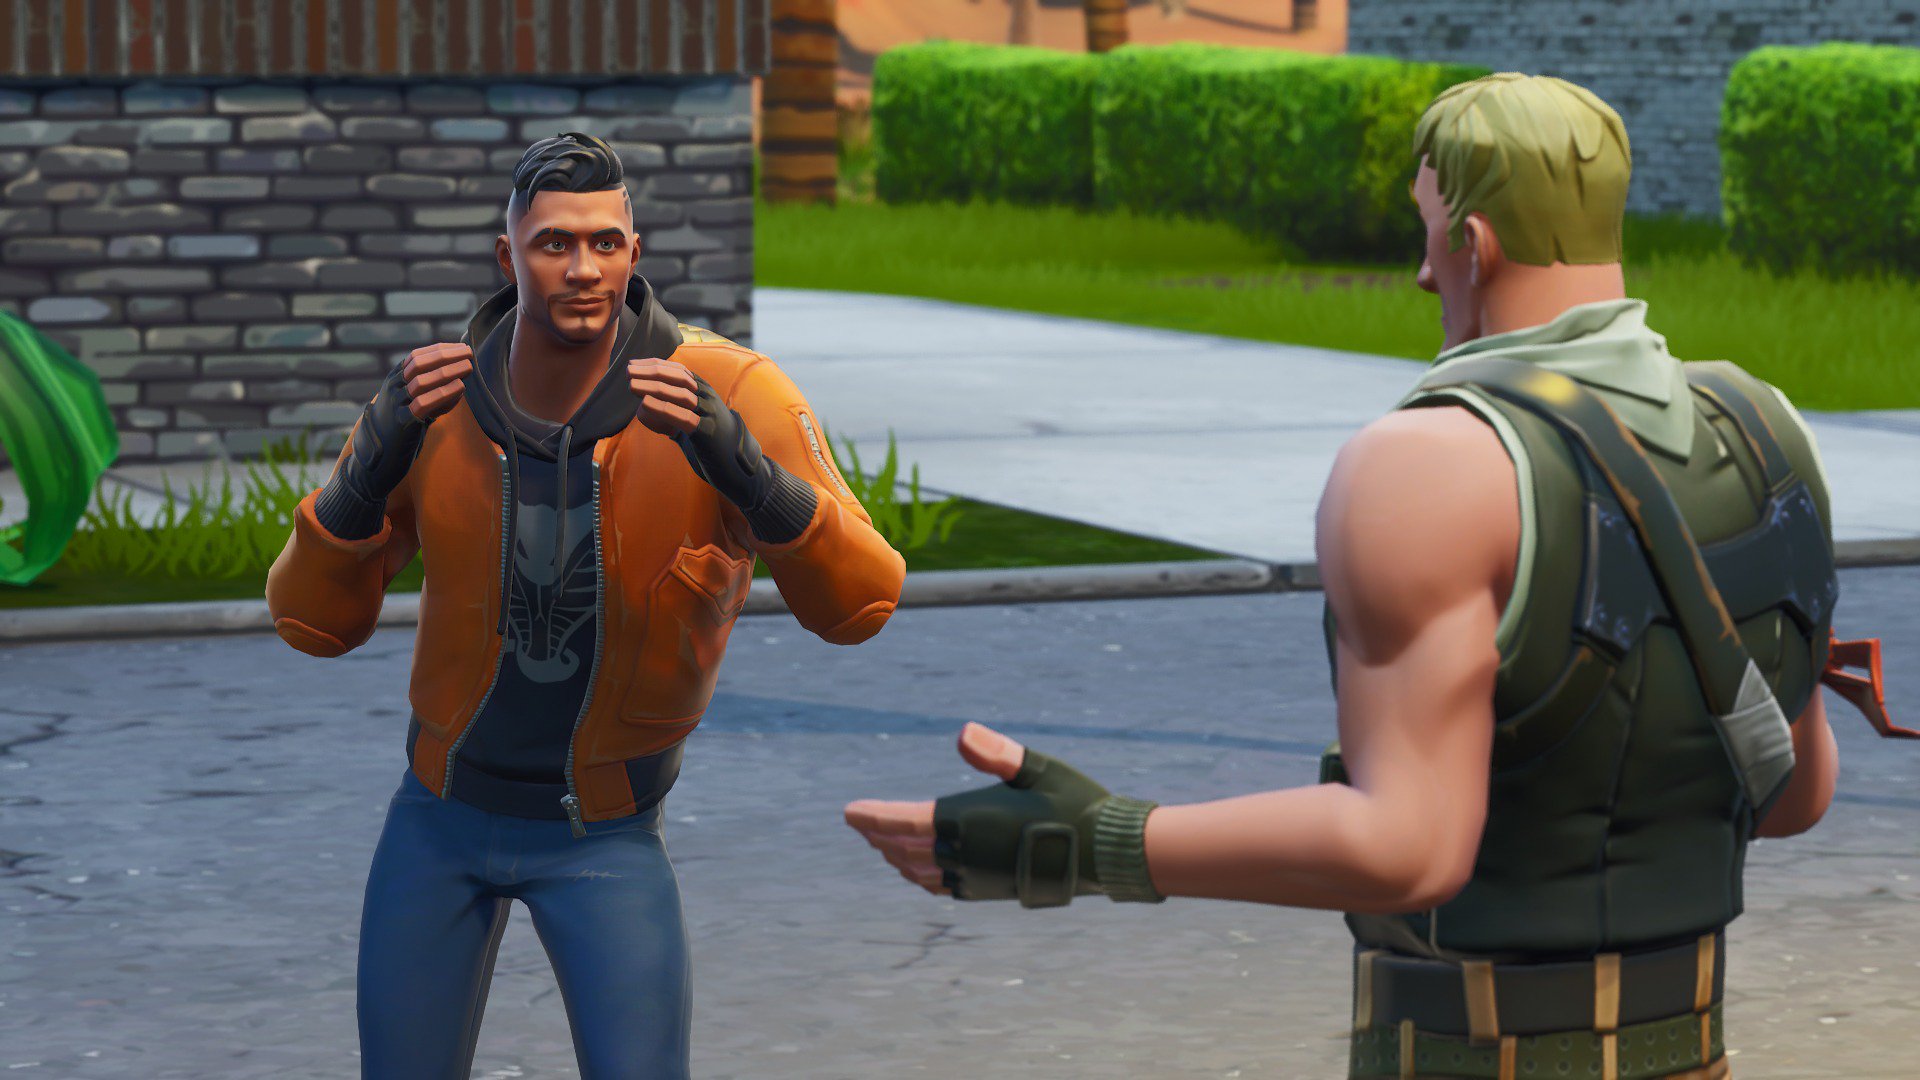 Something popped when the Default's combat boots stroke his balls....